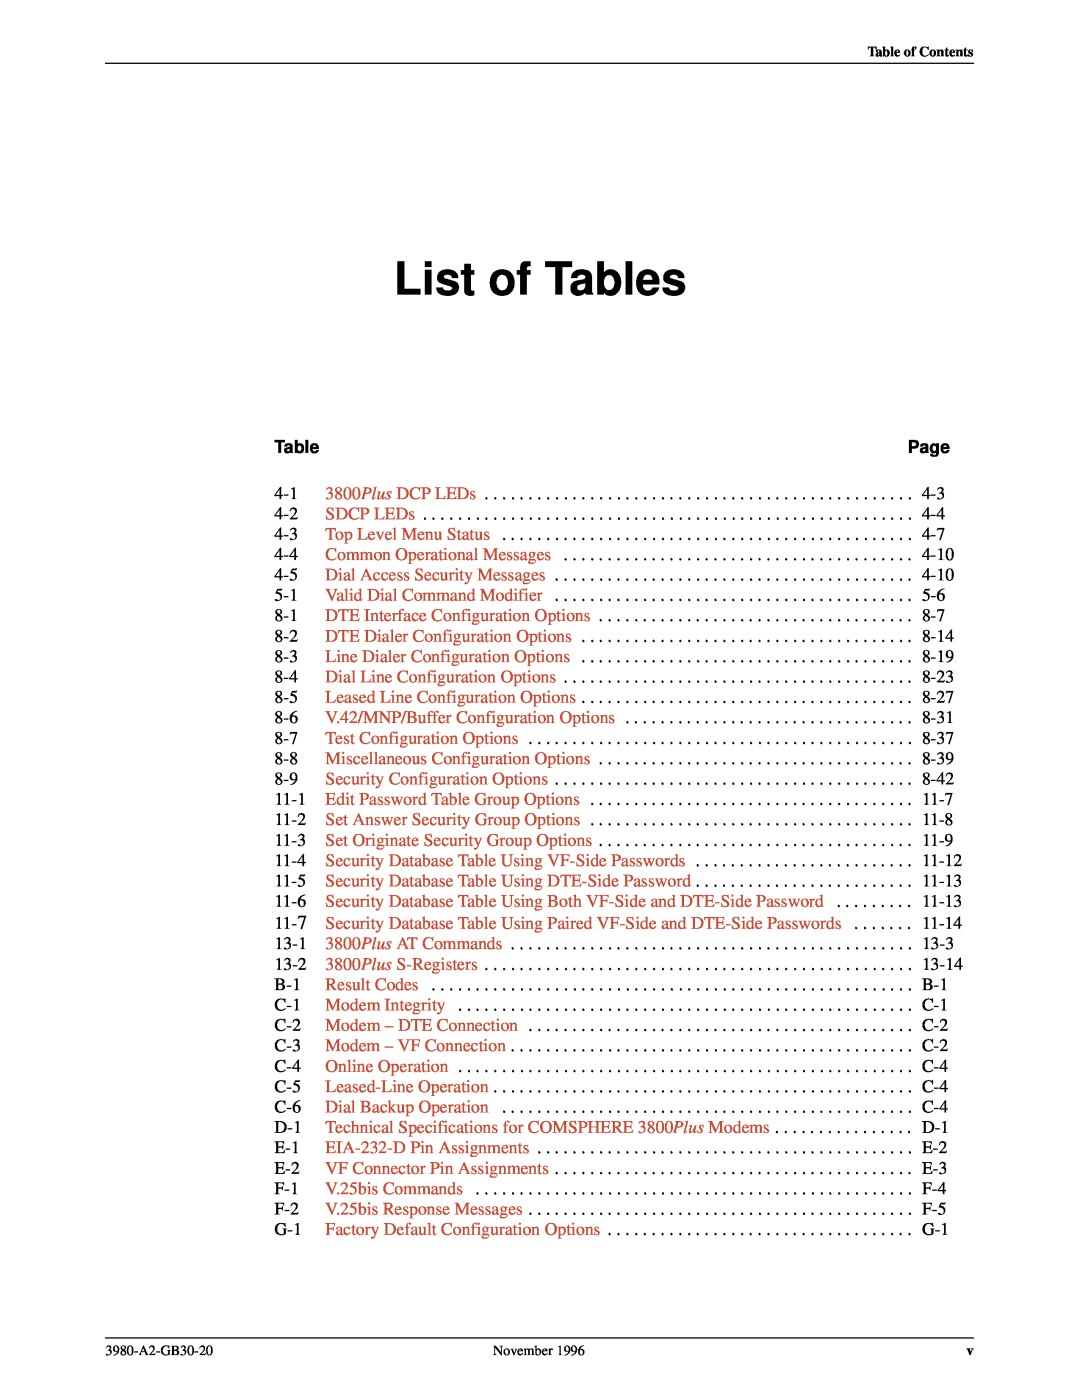 Paradyne 3800PLUS manual List of Tables, Security Database Table Using VF-Side Passwords, Page 